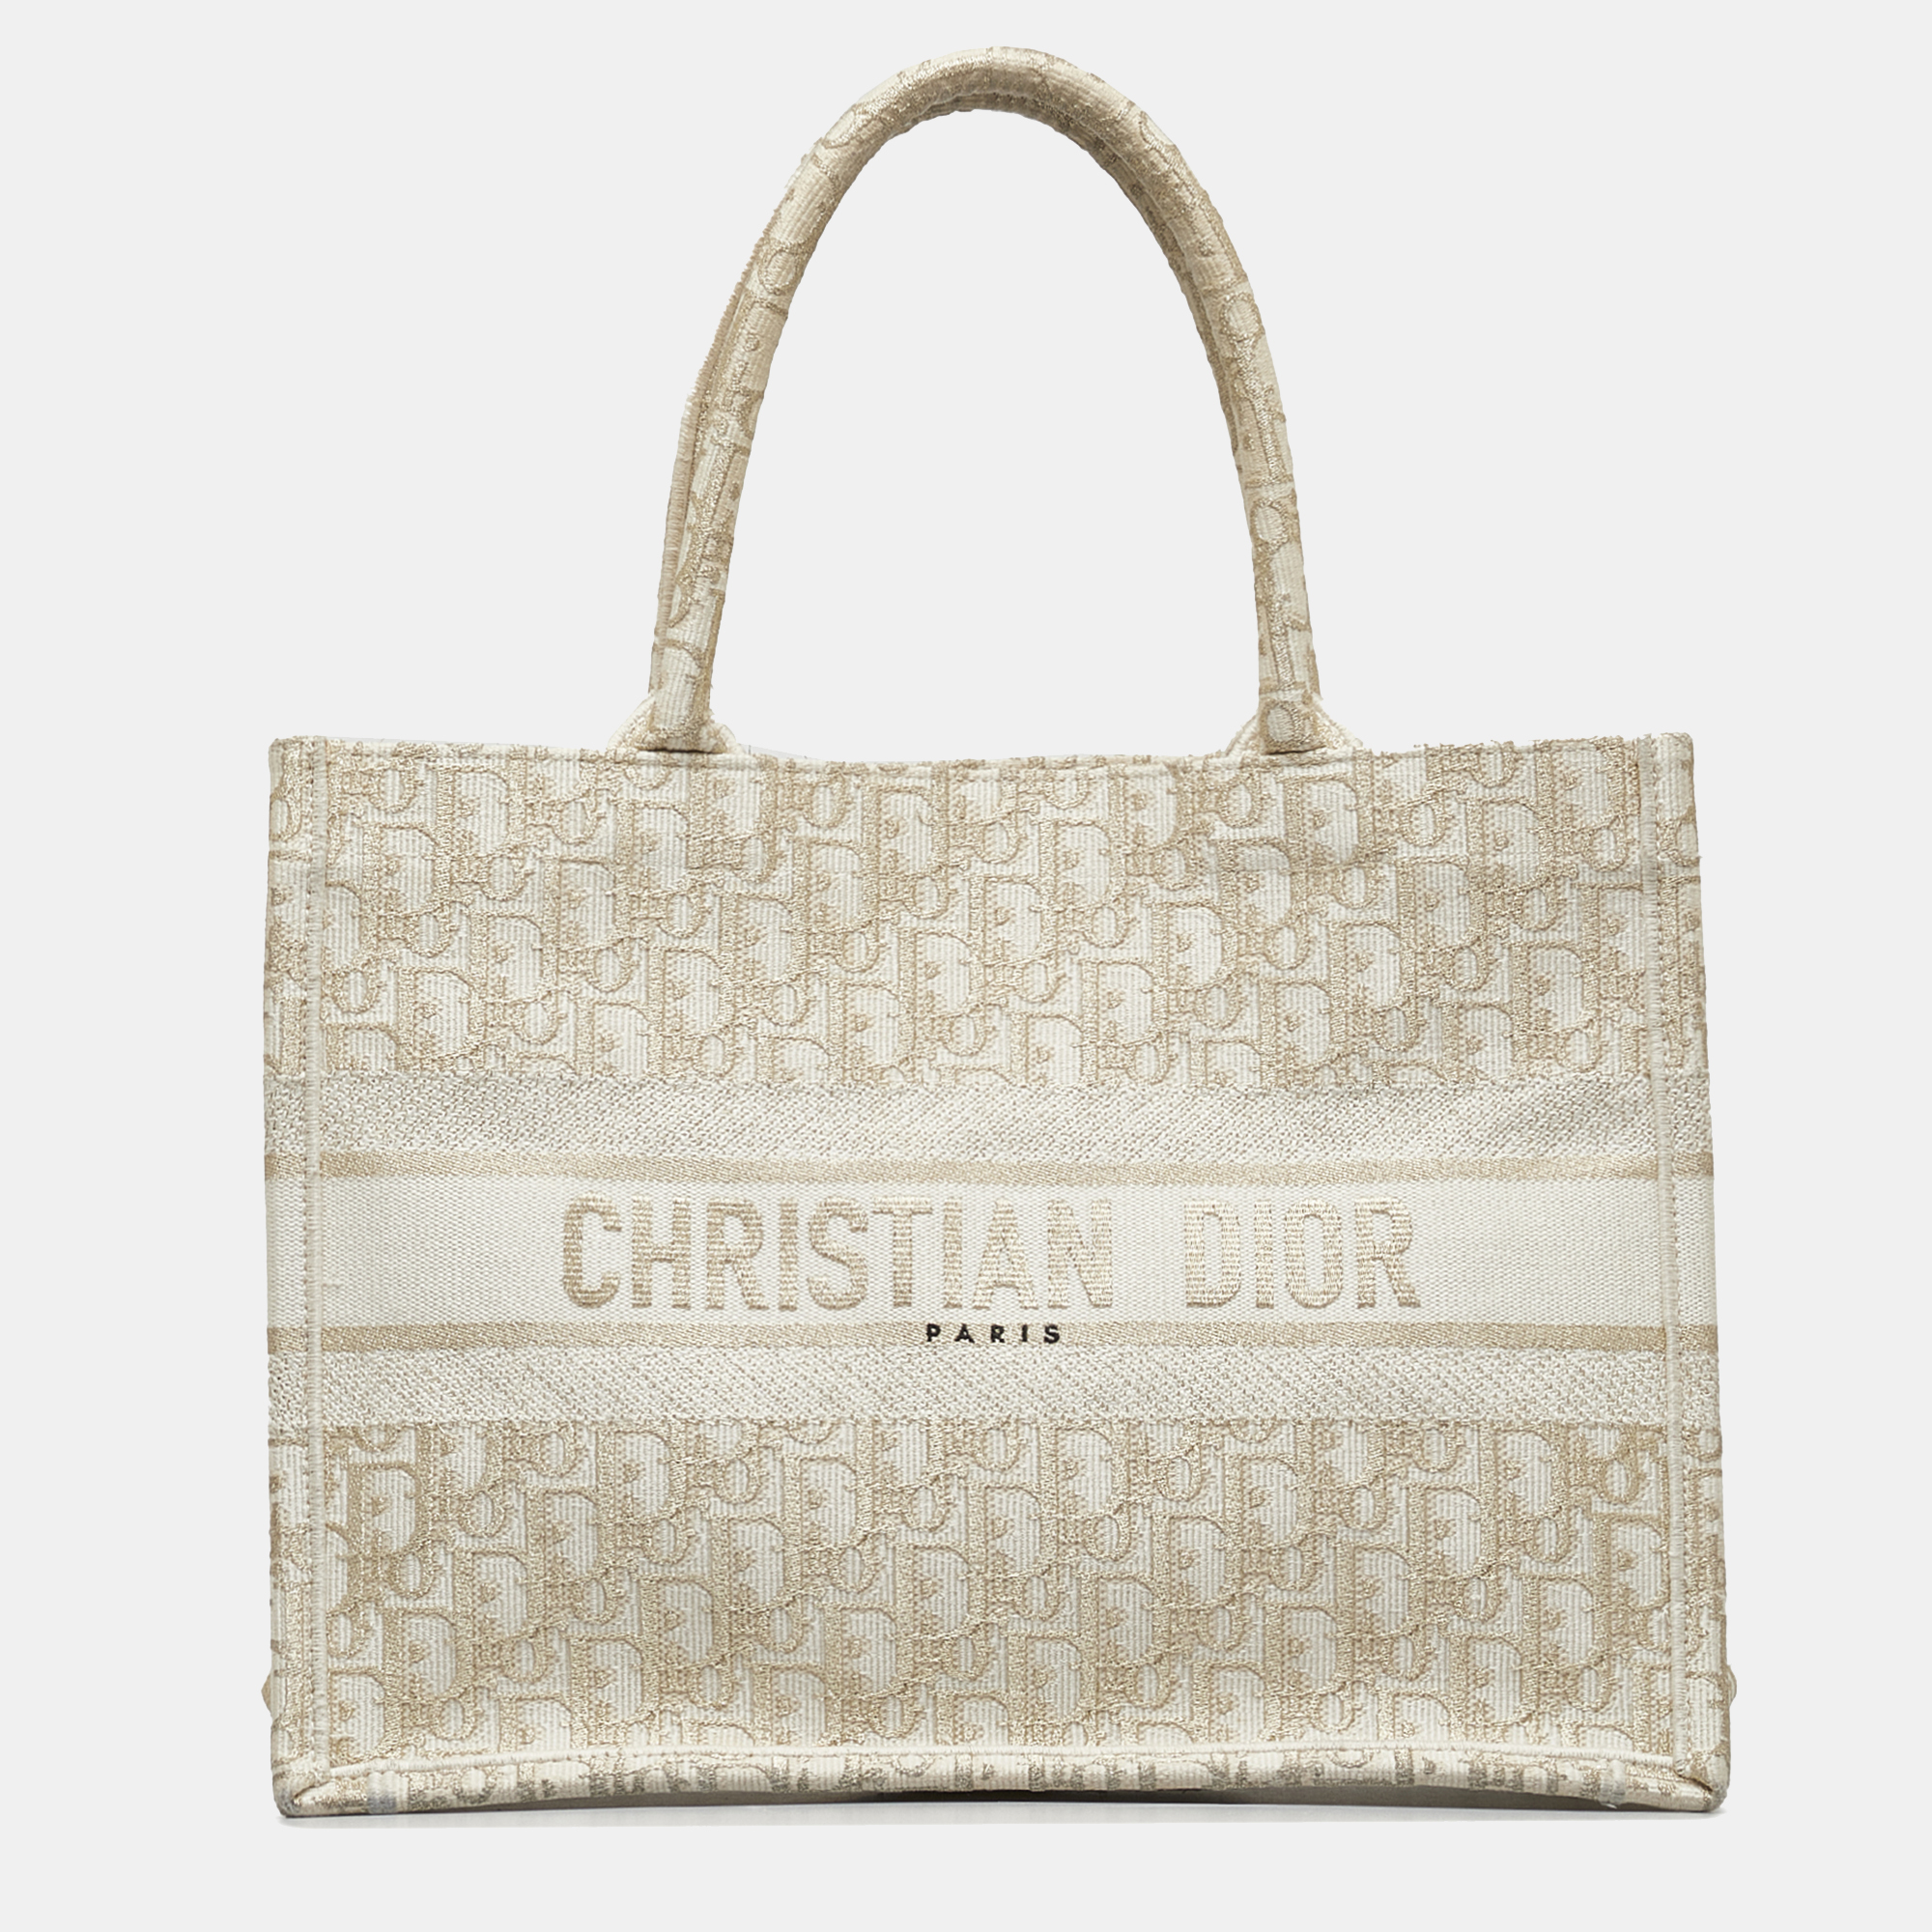 The Book Tote features a canvas body rolled canvas handles and an open top. Elevate your every day with this Dior tote. Meticulously designed it seamlessly blends functionality with luxury offering the perfect accessory to showcase your discerning style while effortlessly carrying your essentials.